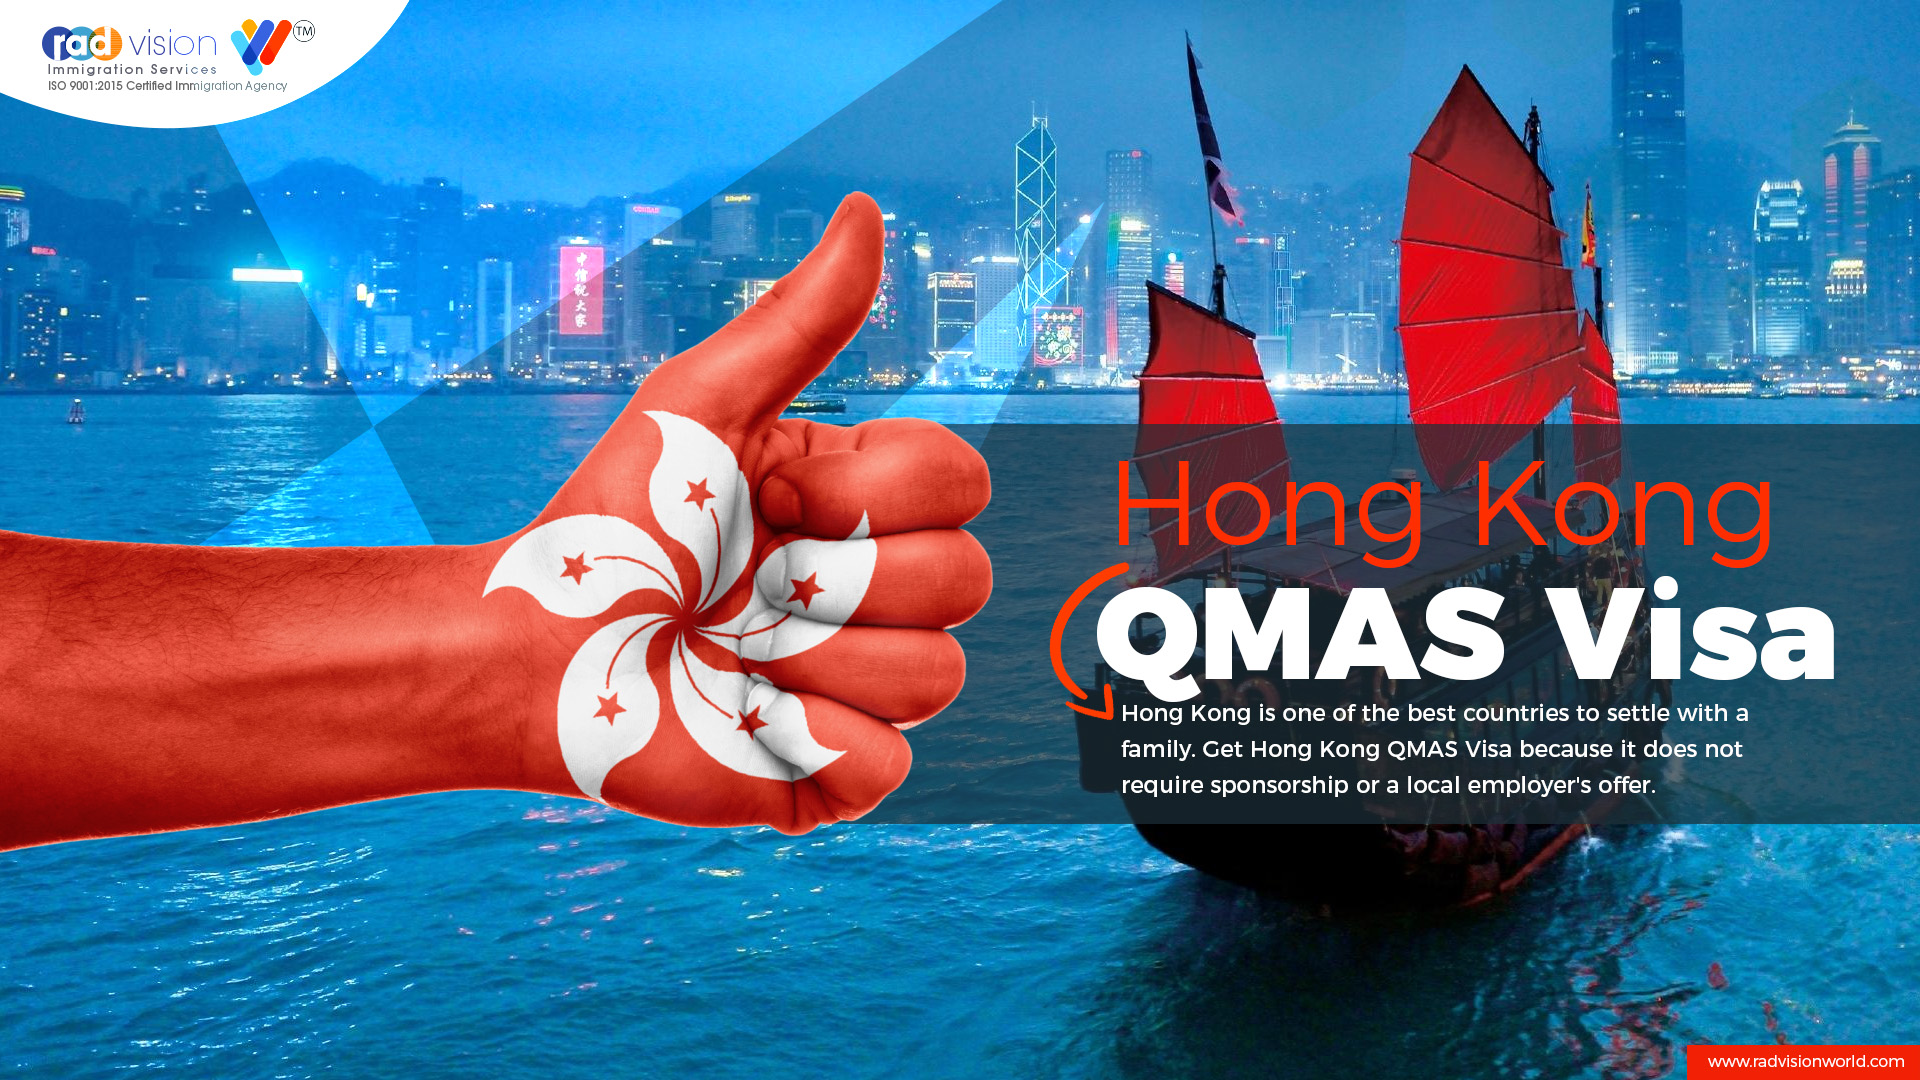 Hong Kong QMAS Visa. Looking To Settle In Hong Kong, No Need For Offer Letters.